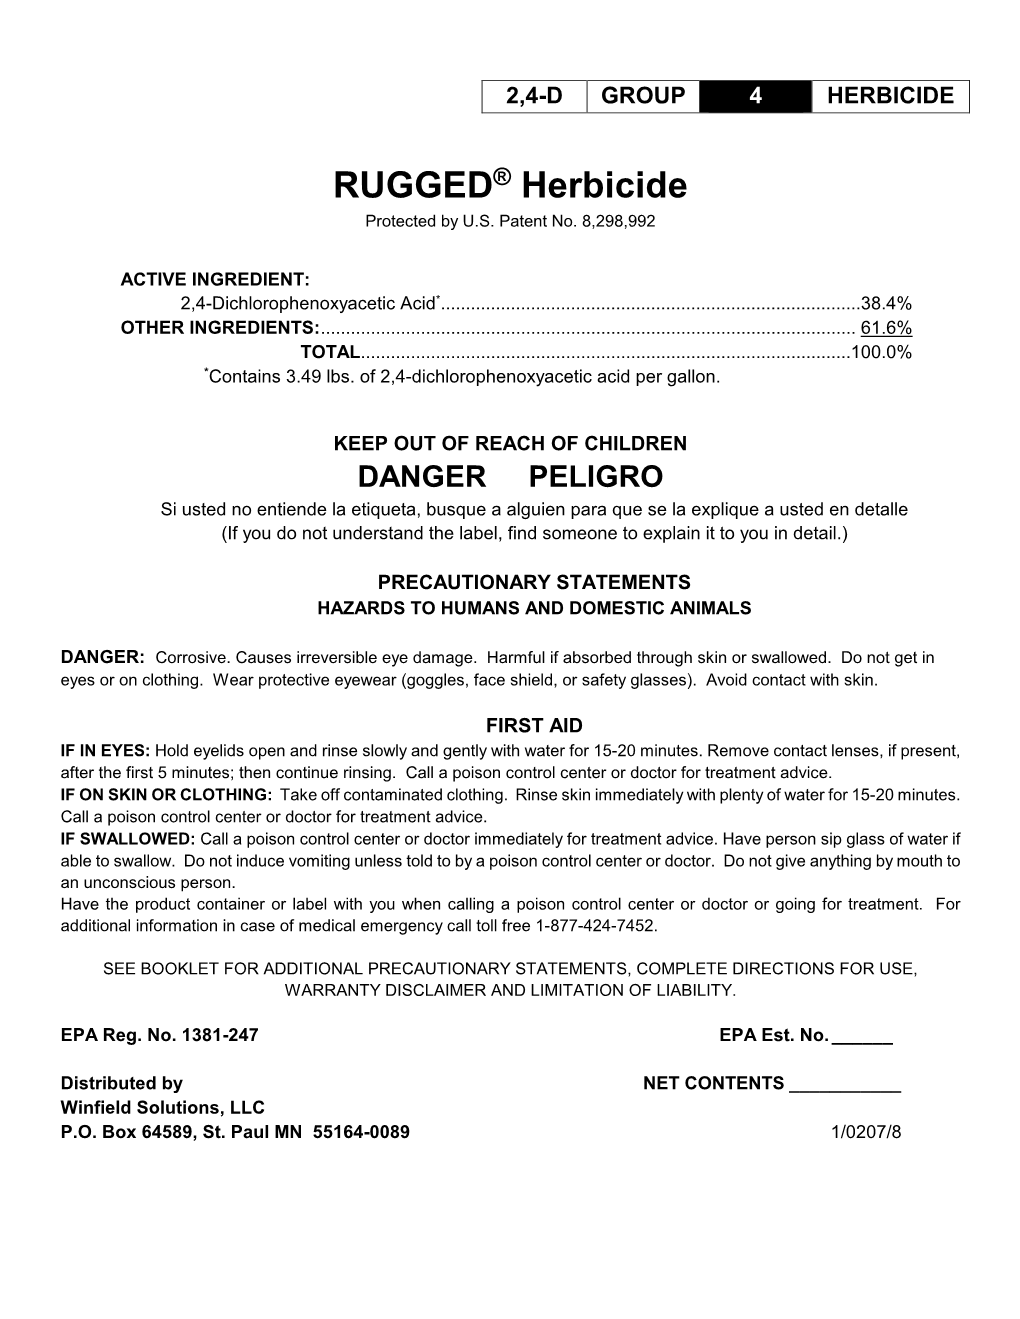 RUGGED® Herbicide Protected by U.S